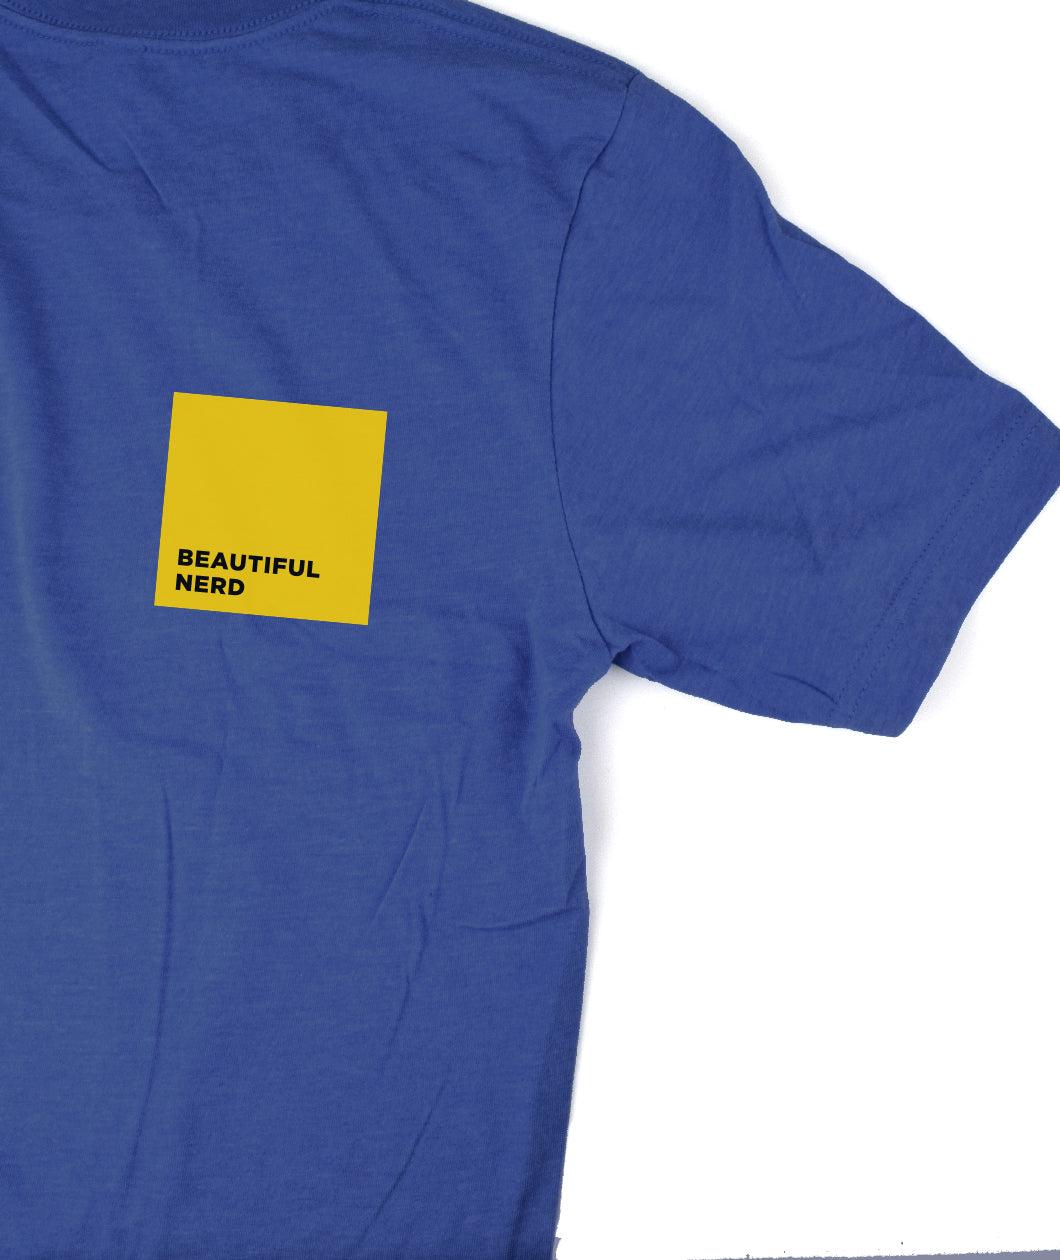 Part of a royal blue t-shirt that has a yellow square with the words "Beautiful Nerd" inside it - by 99% Invisible